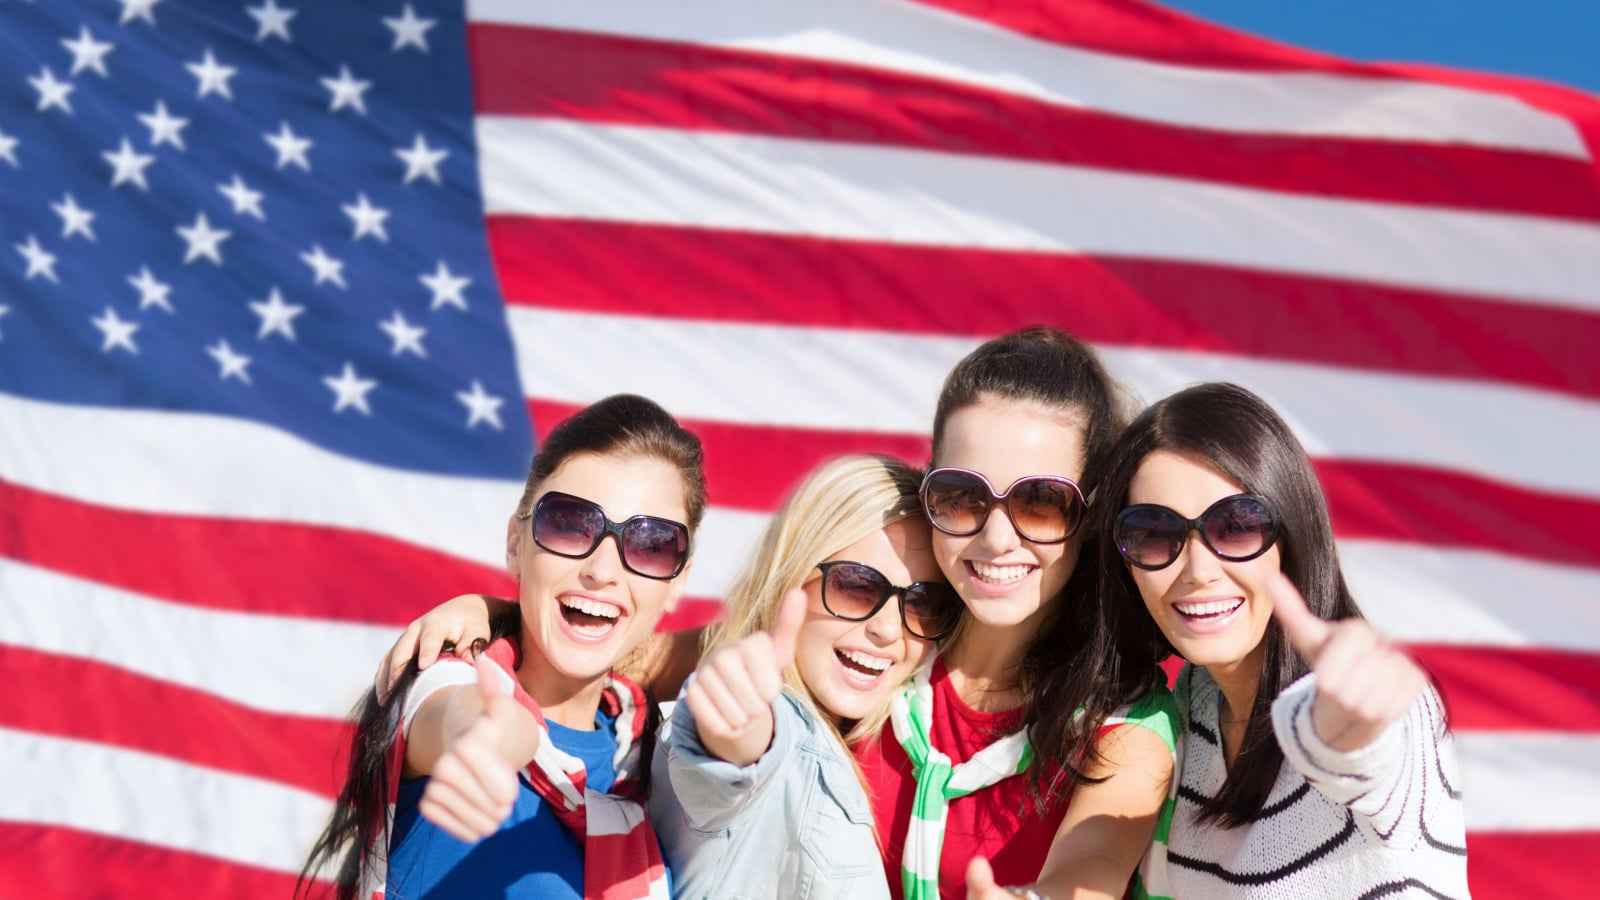 women traveling in the united states summer, holidays, vacation, happy people concept - beautiful teenage girls or young women showing thumbs up